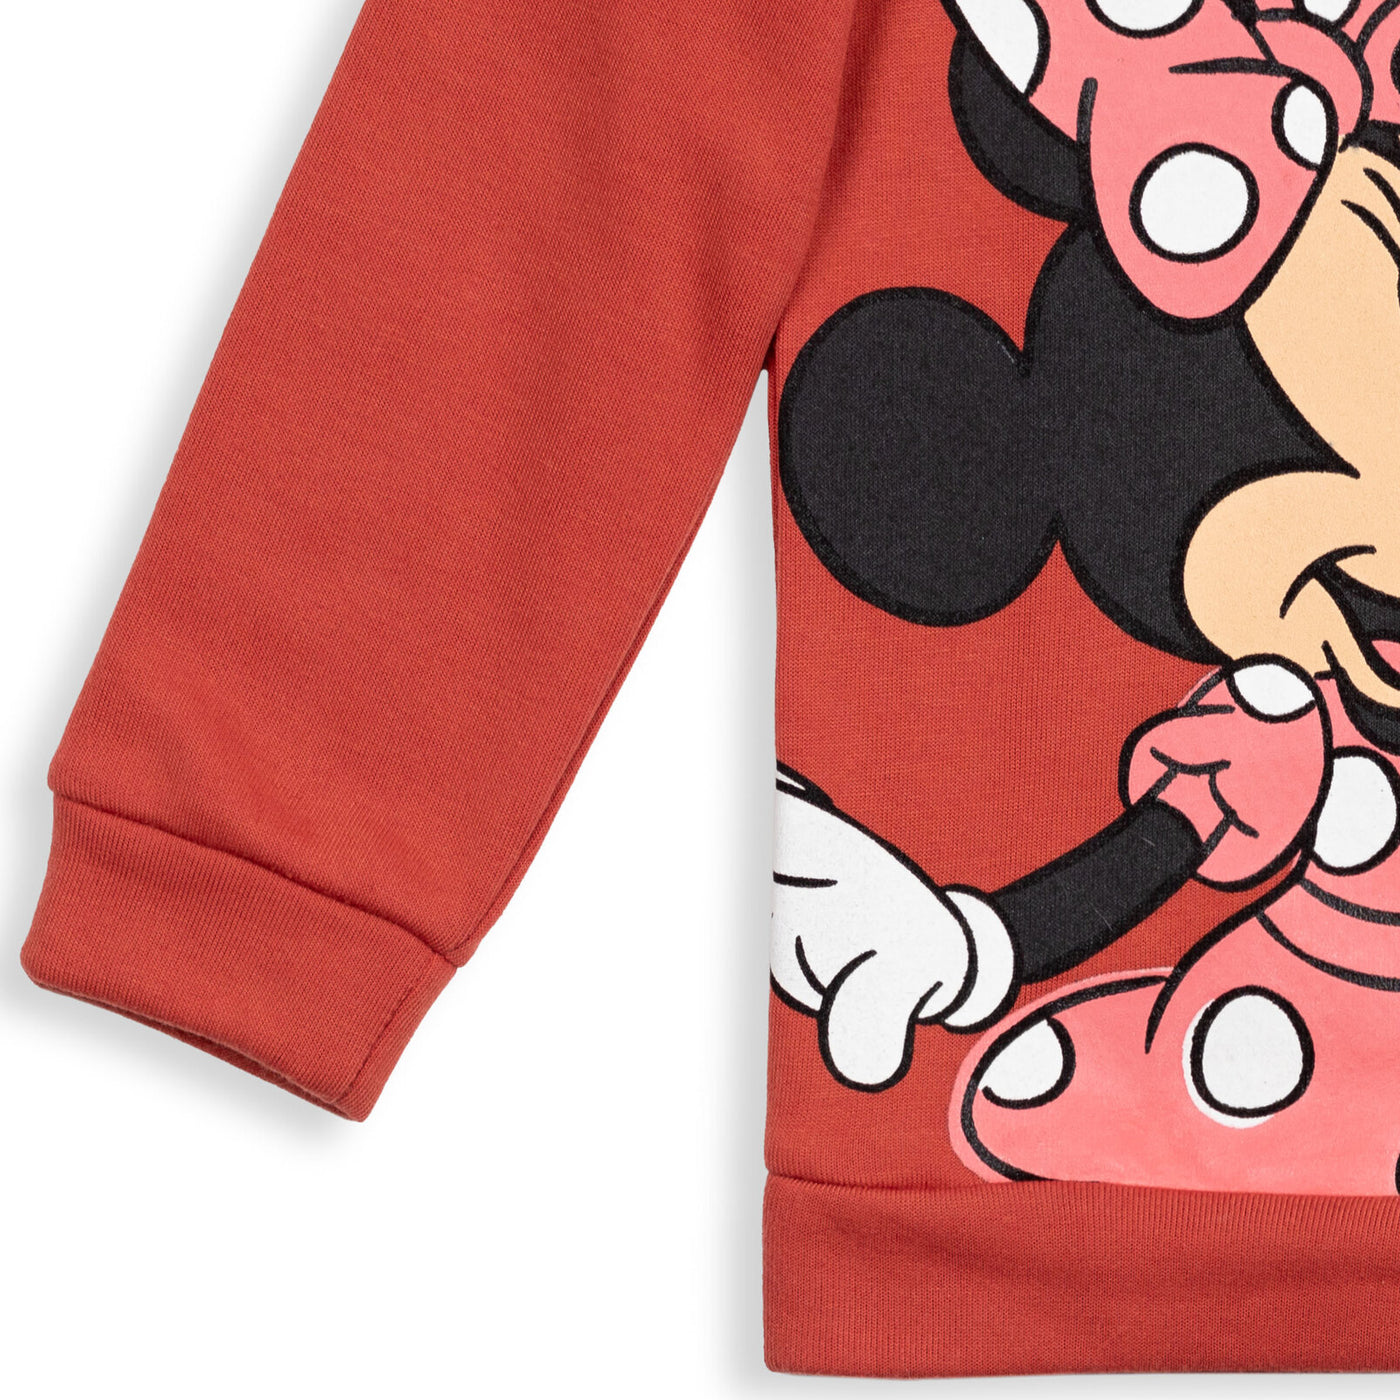 Minnie Mouse Fleece Pullover Hoodie